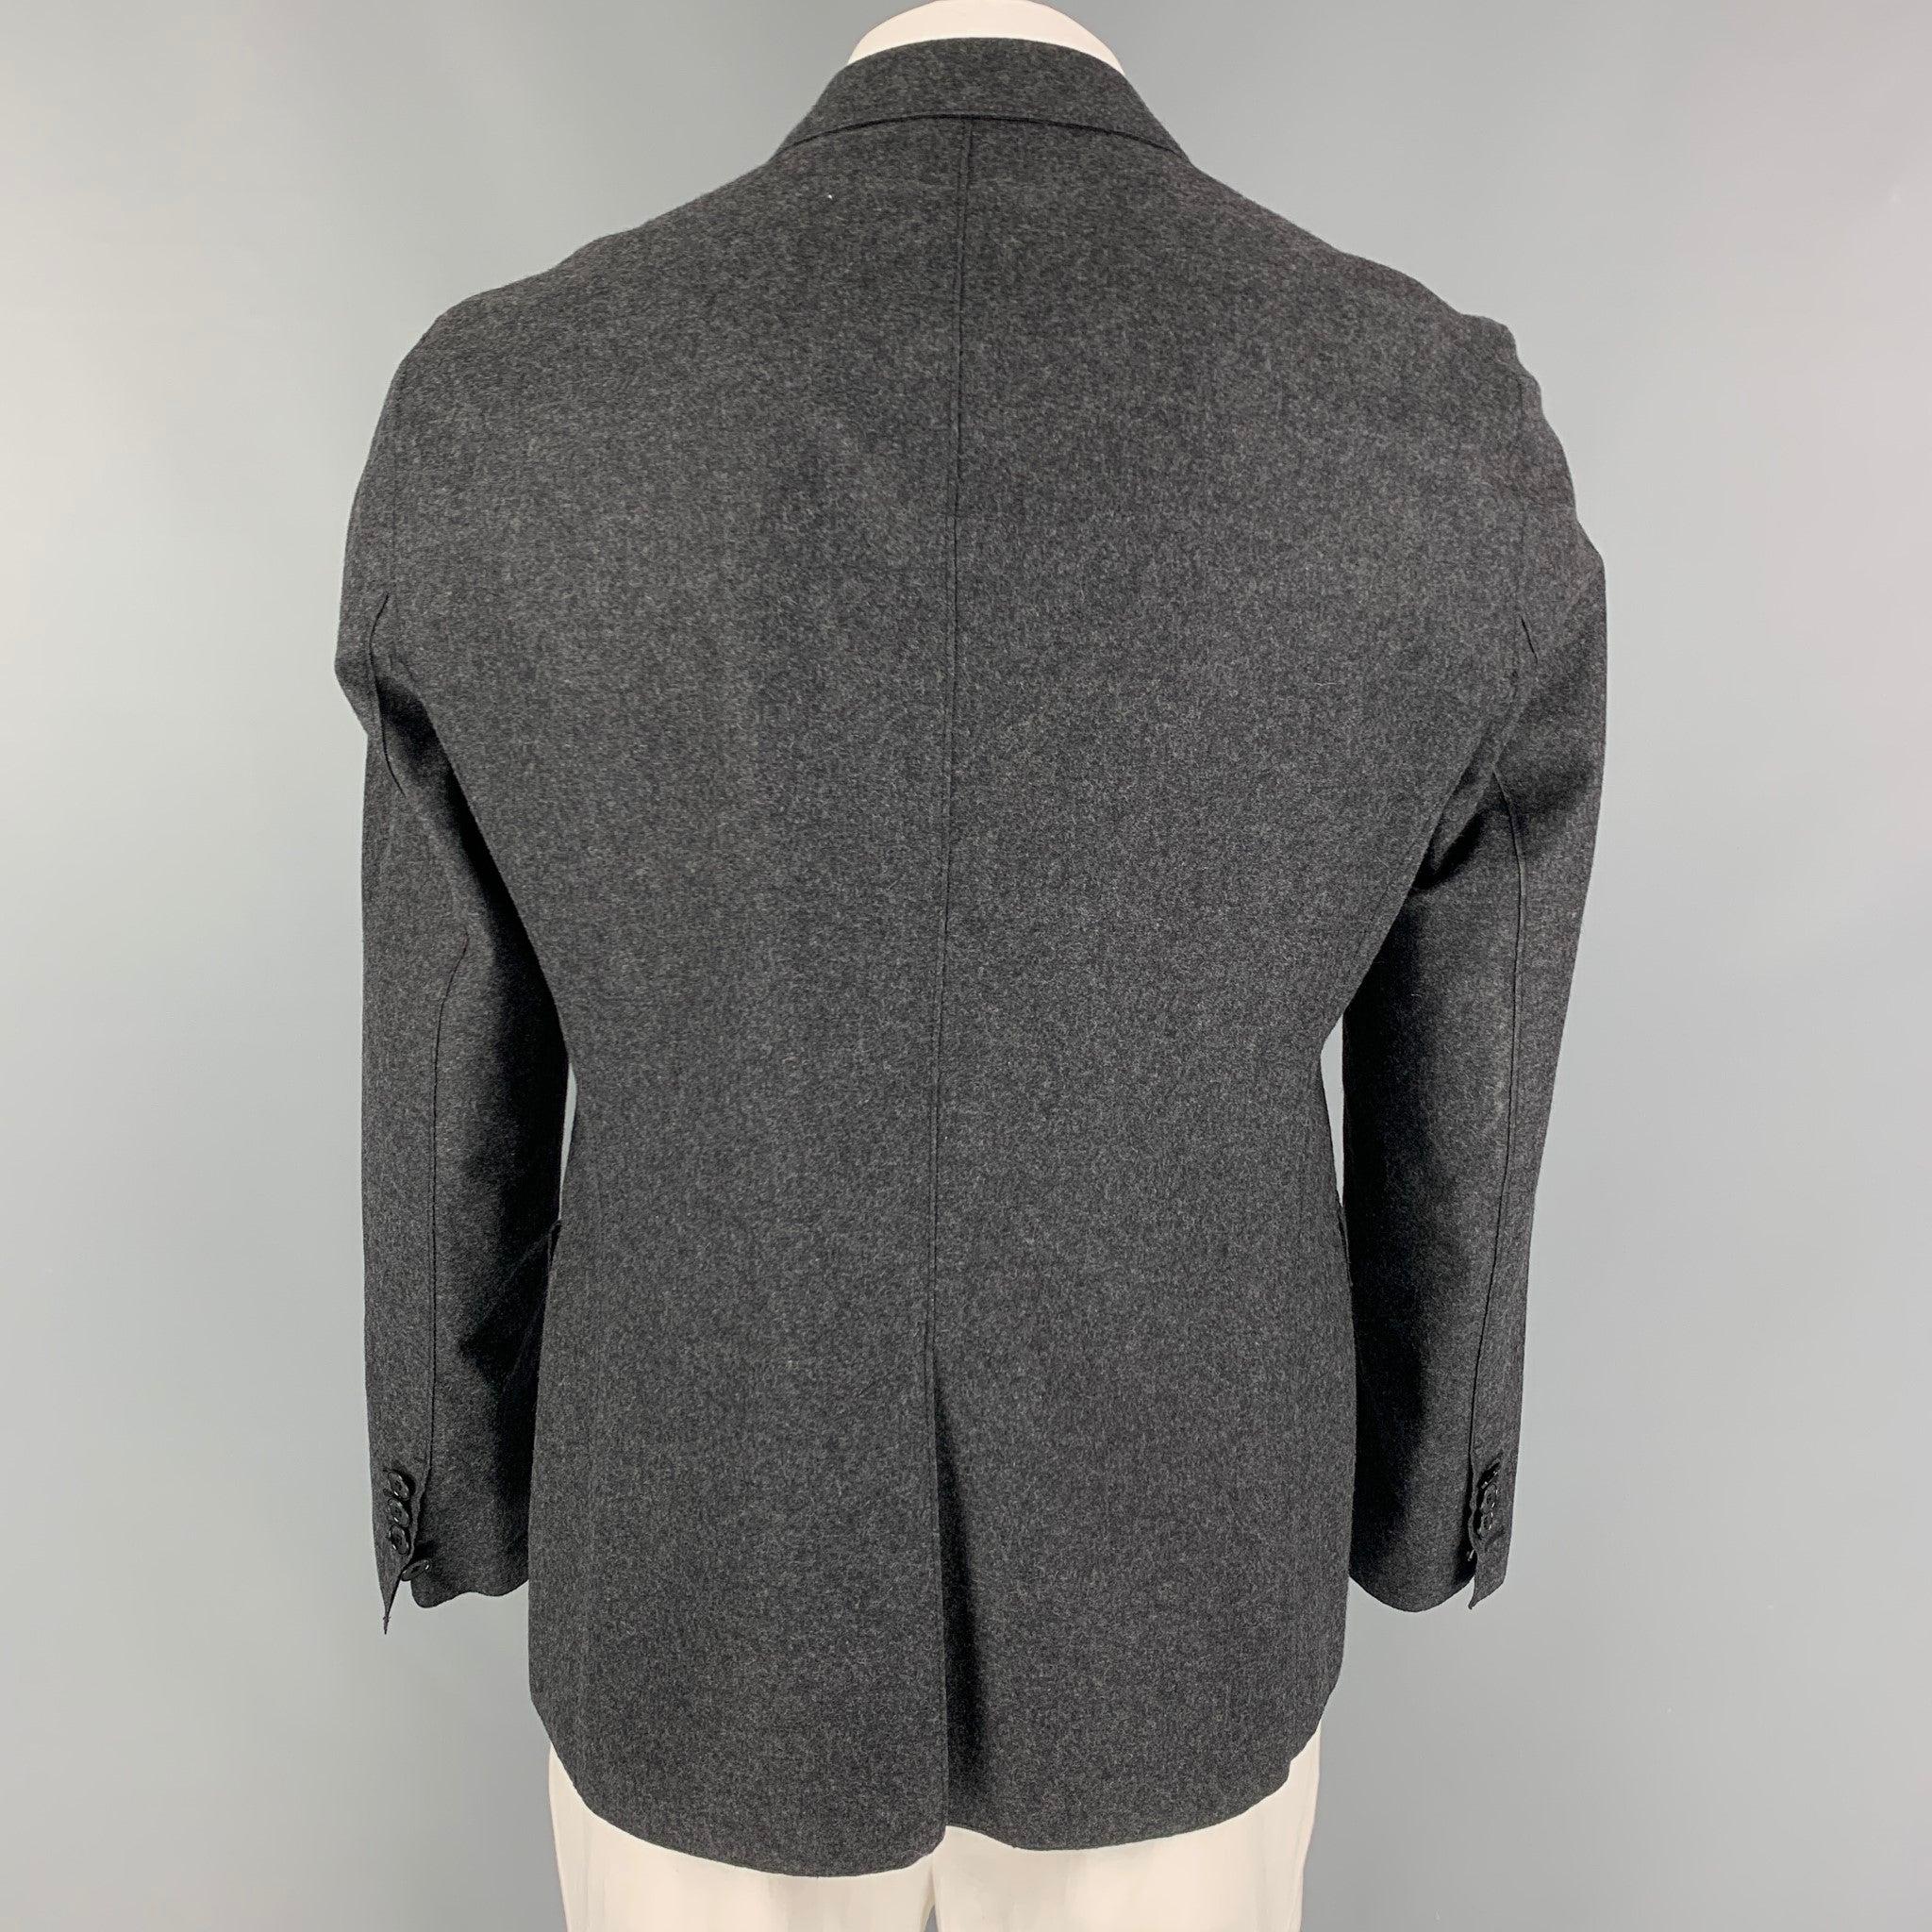 EMPORIO ARMANI Size 42 Charcoal Heather Wool Polyamide Sport Coat In Good Condition For Sale In San Francisco, CA